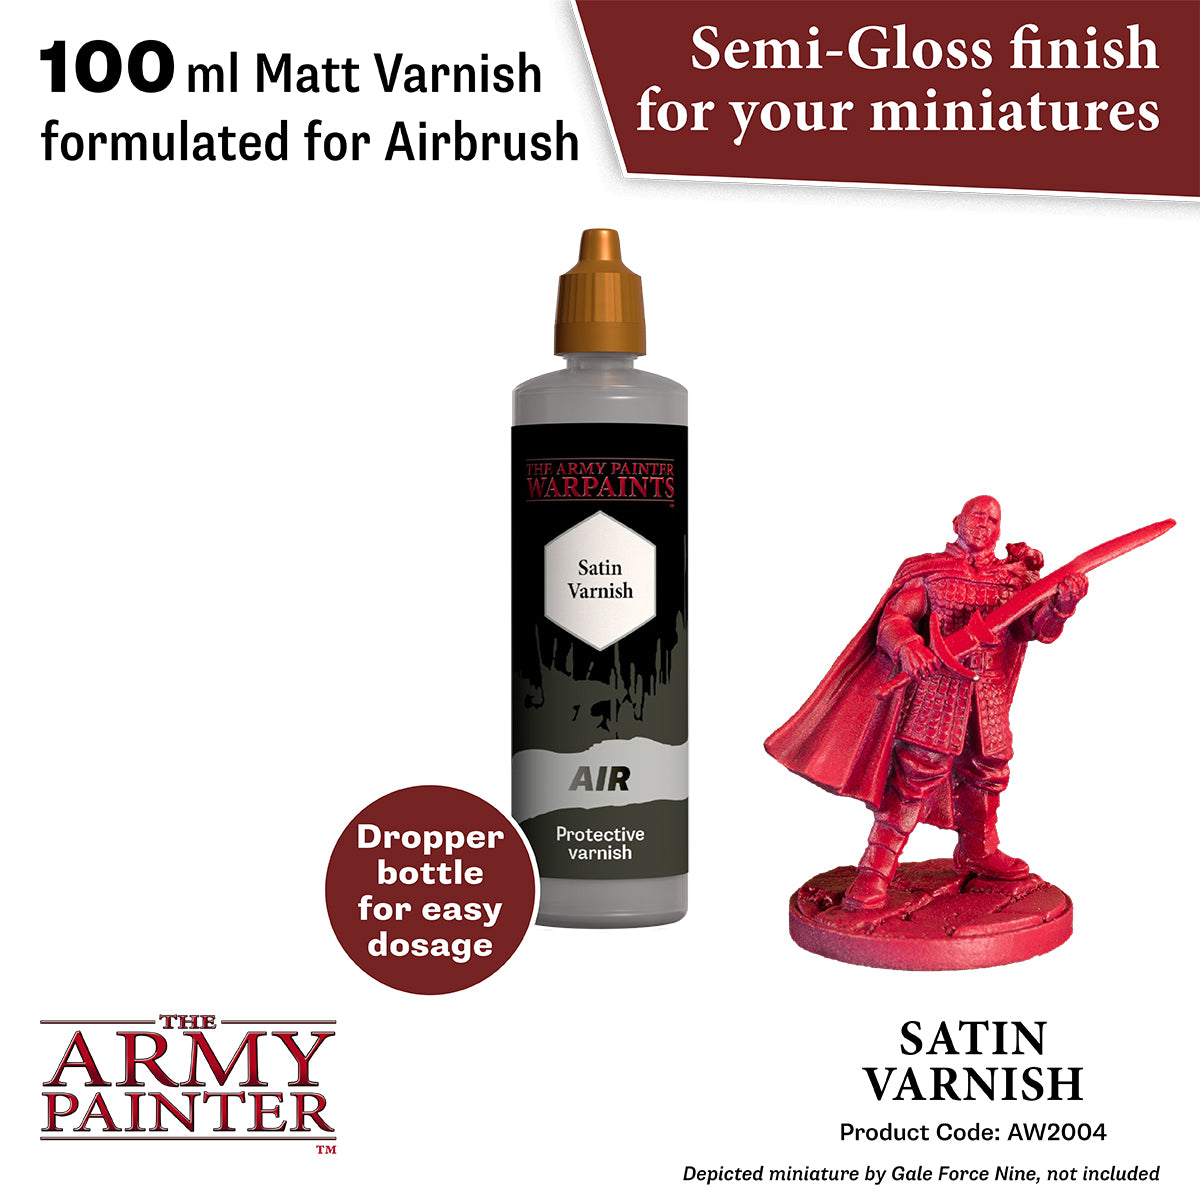  The Army Painter Complete Airbrush Paint Set and